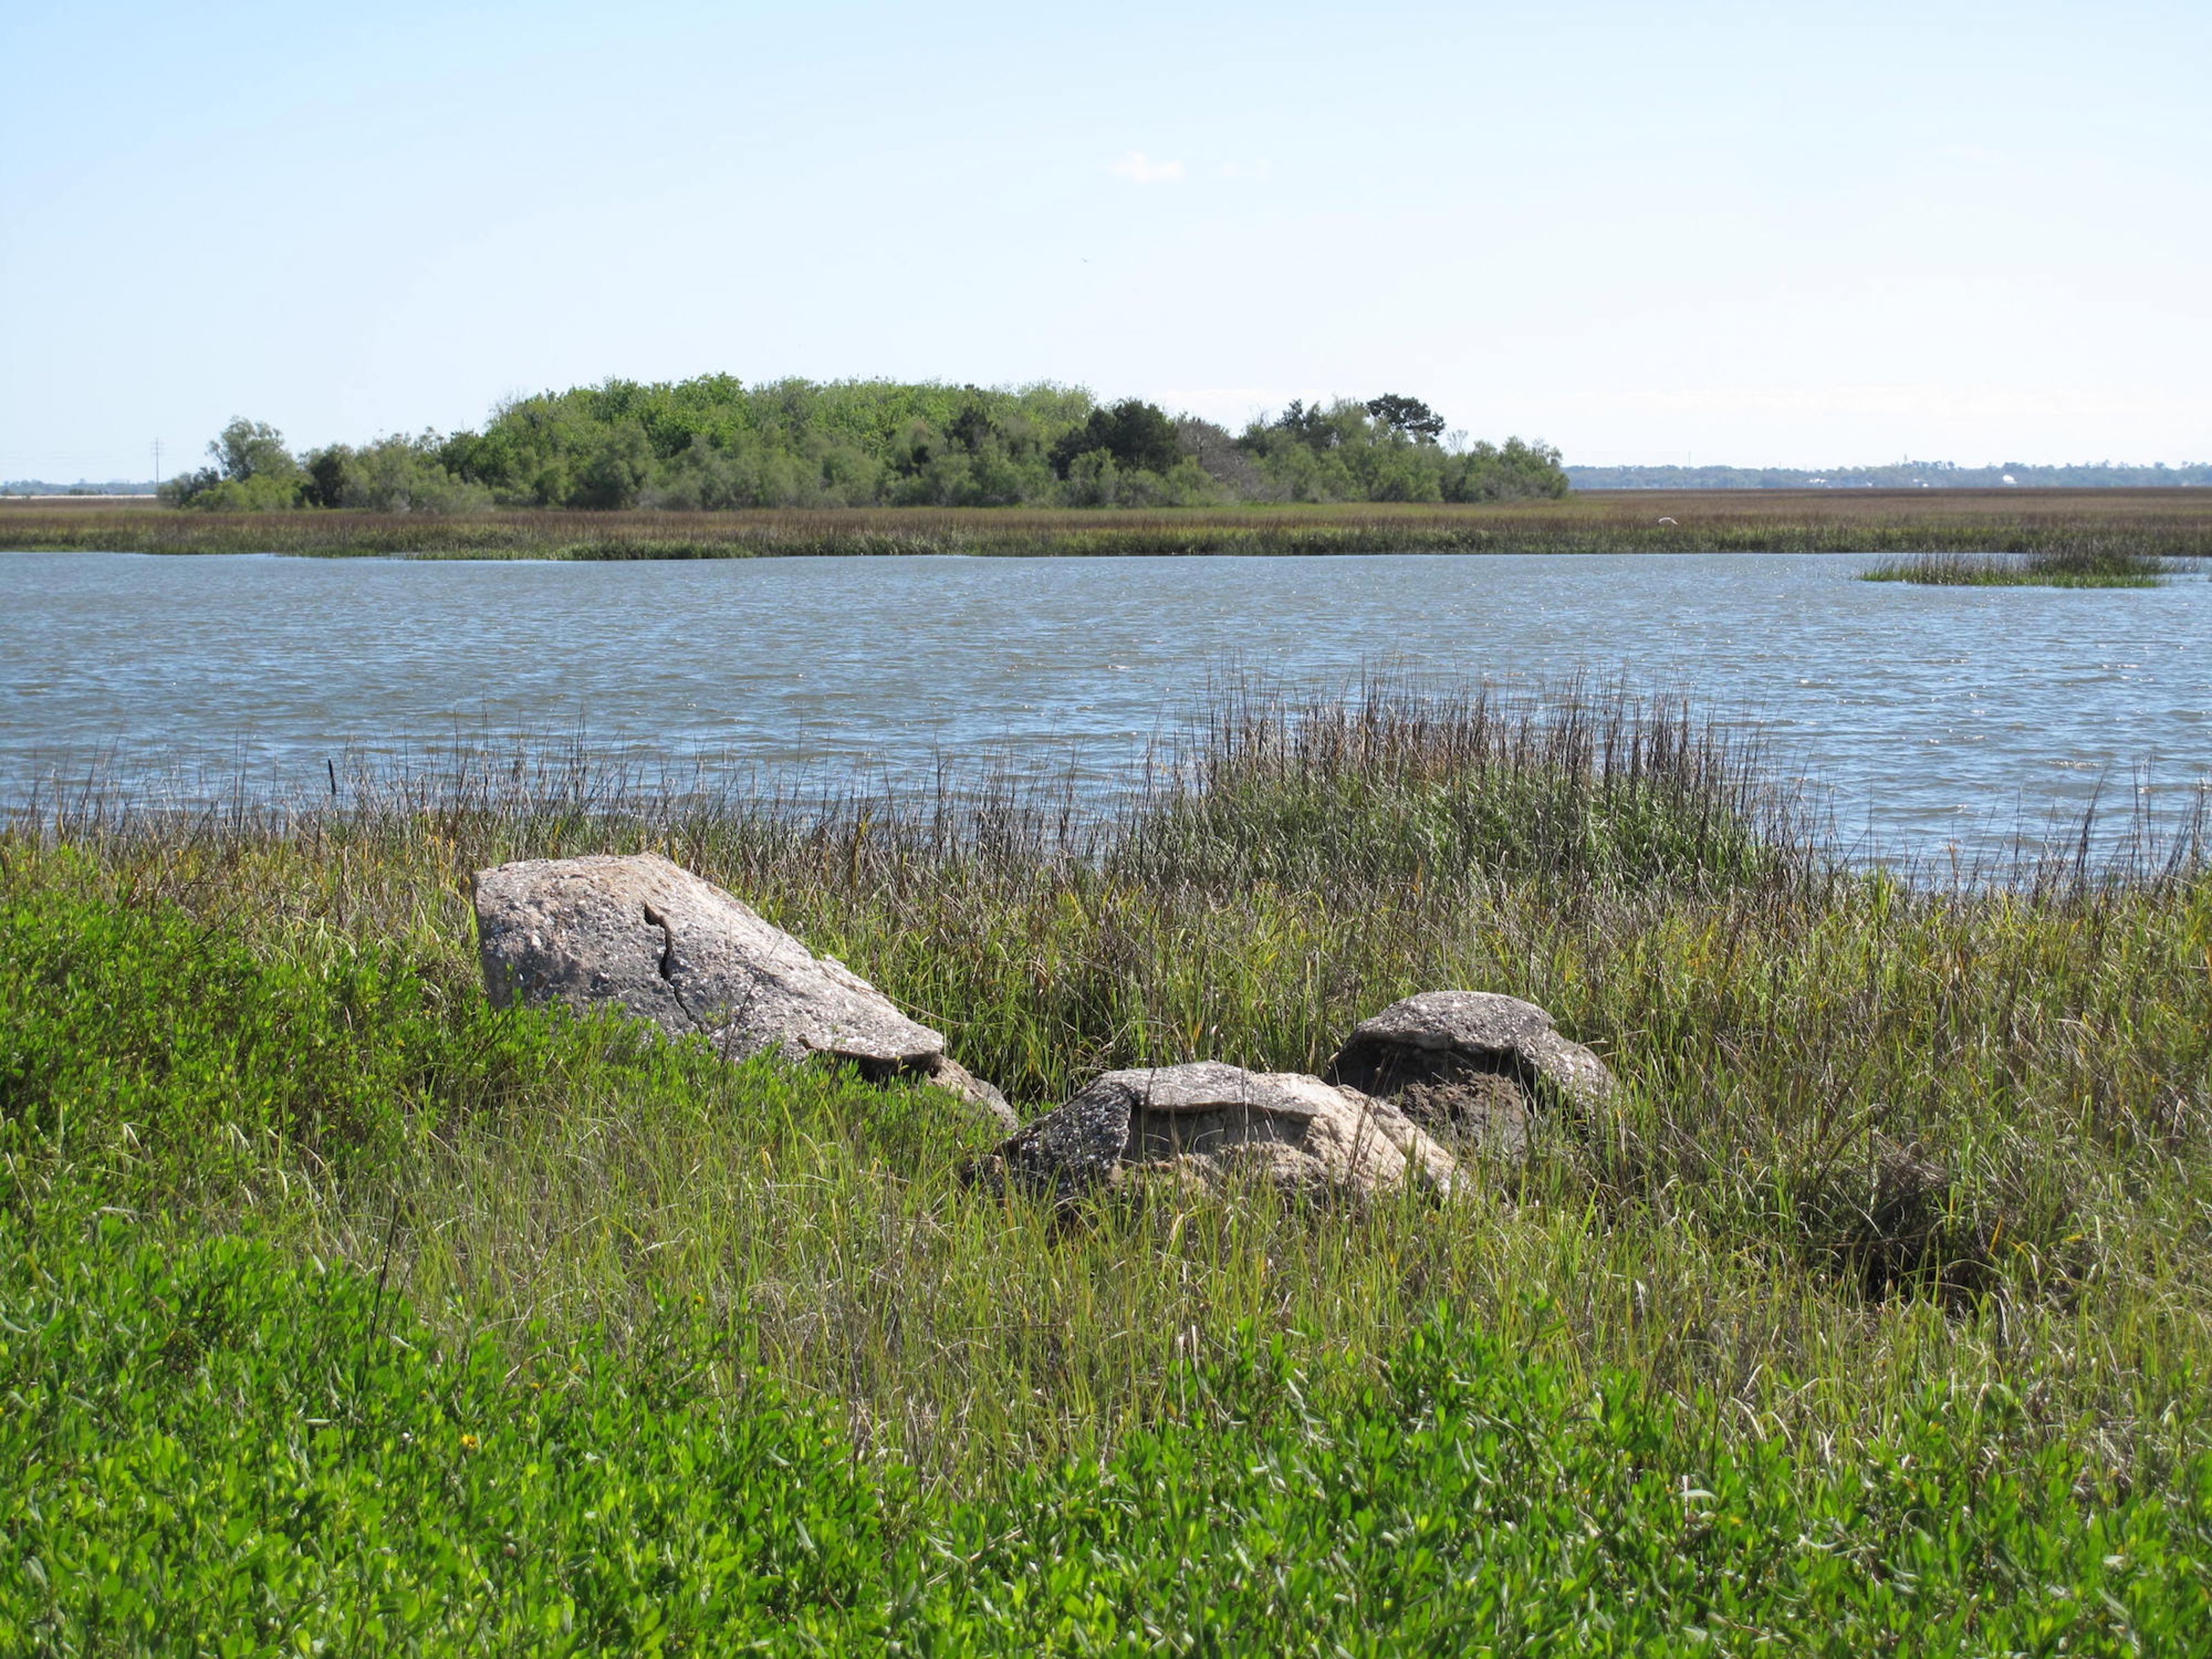 Three rocks in a grassy landscape beside a tranquil lake, with a scenic view of the opposite shore in daylight.